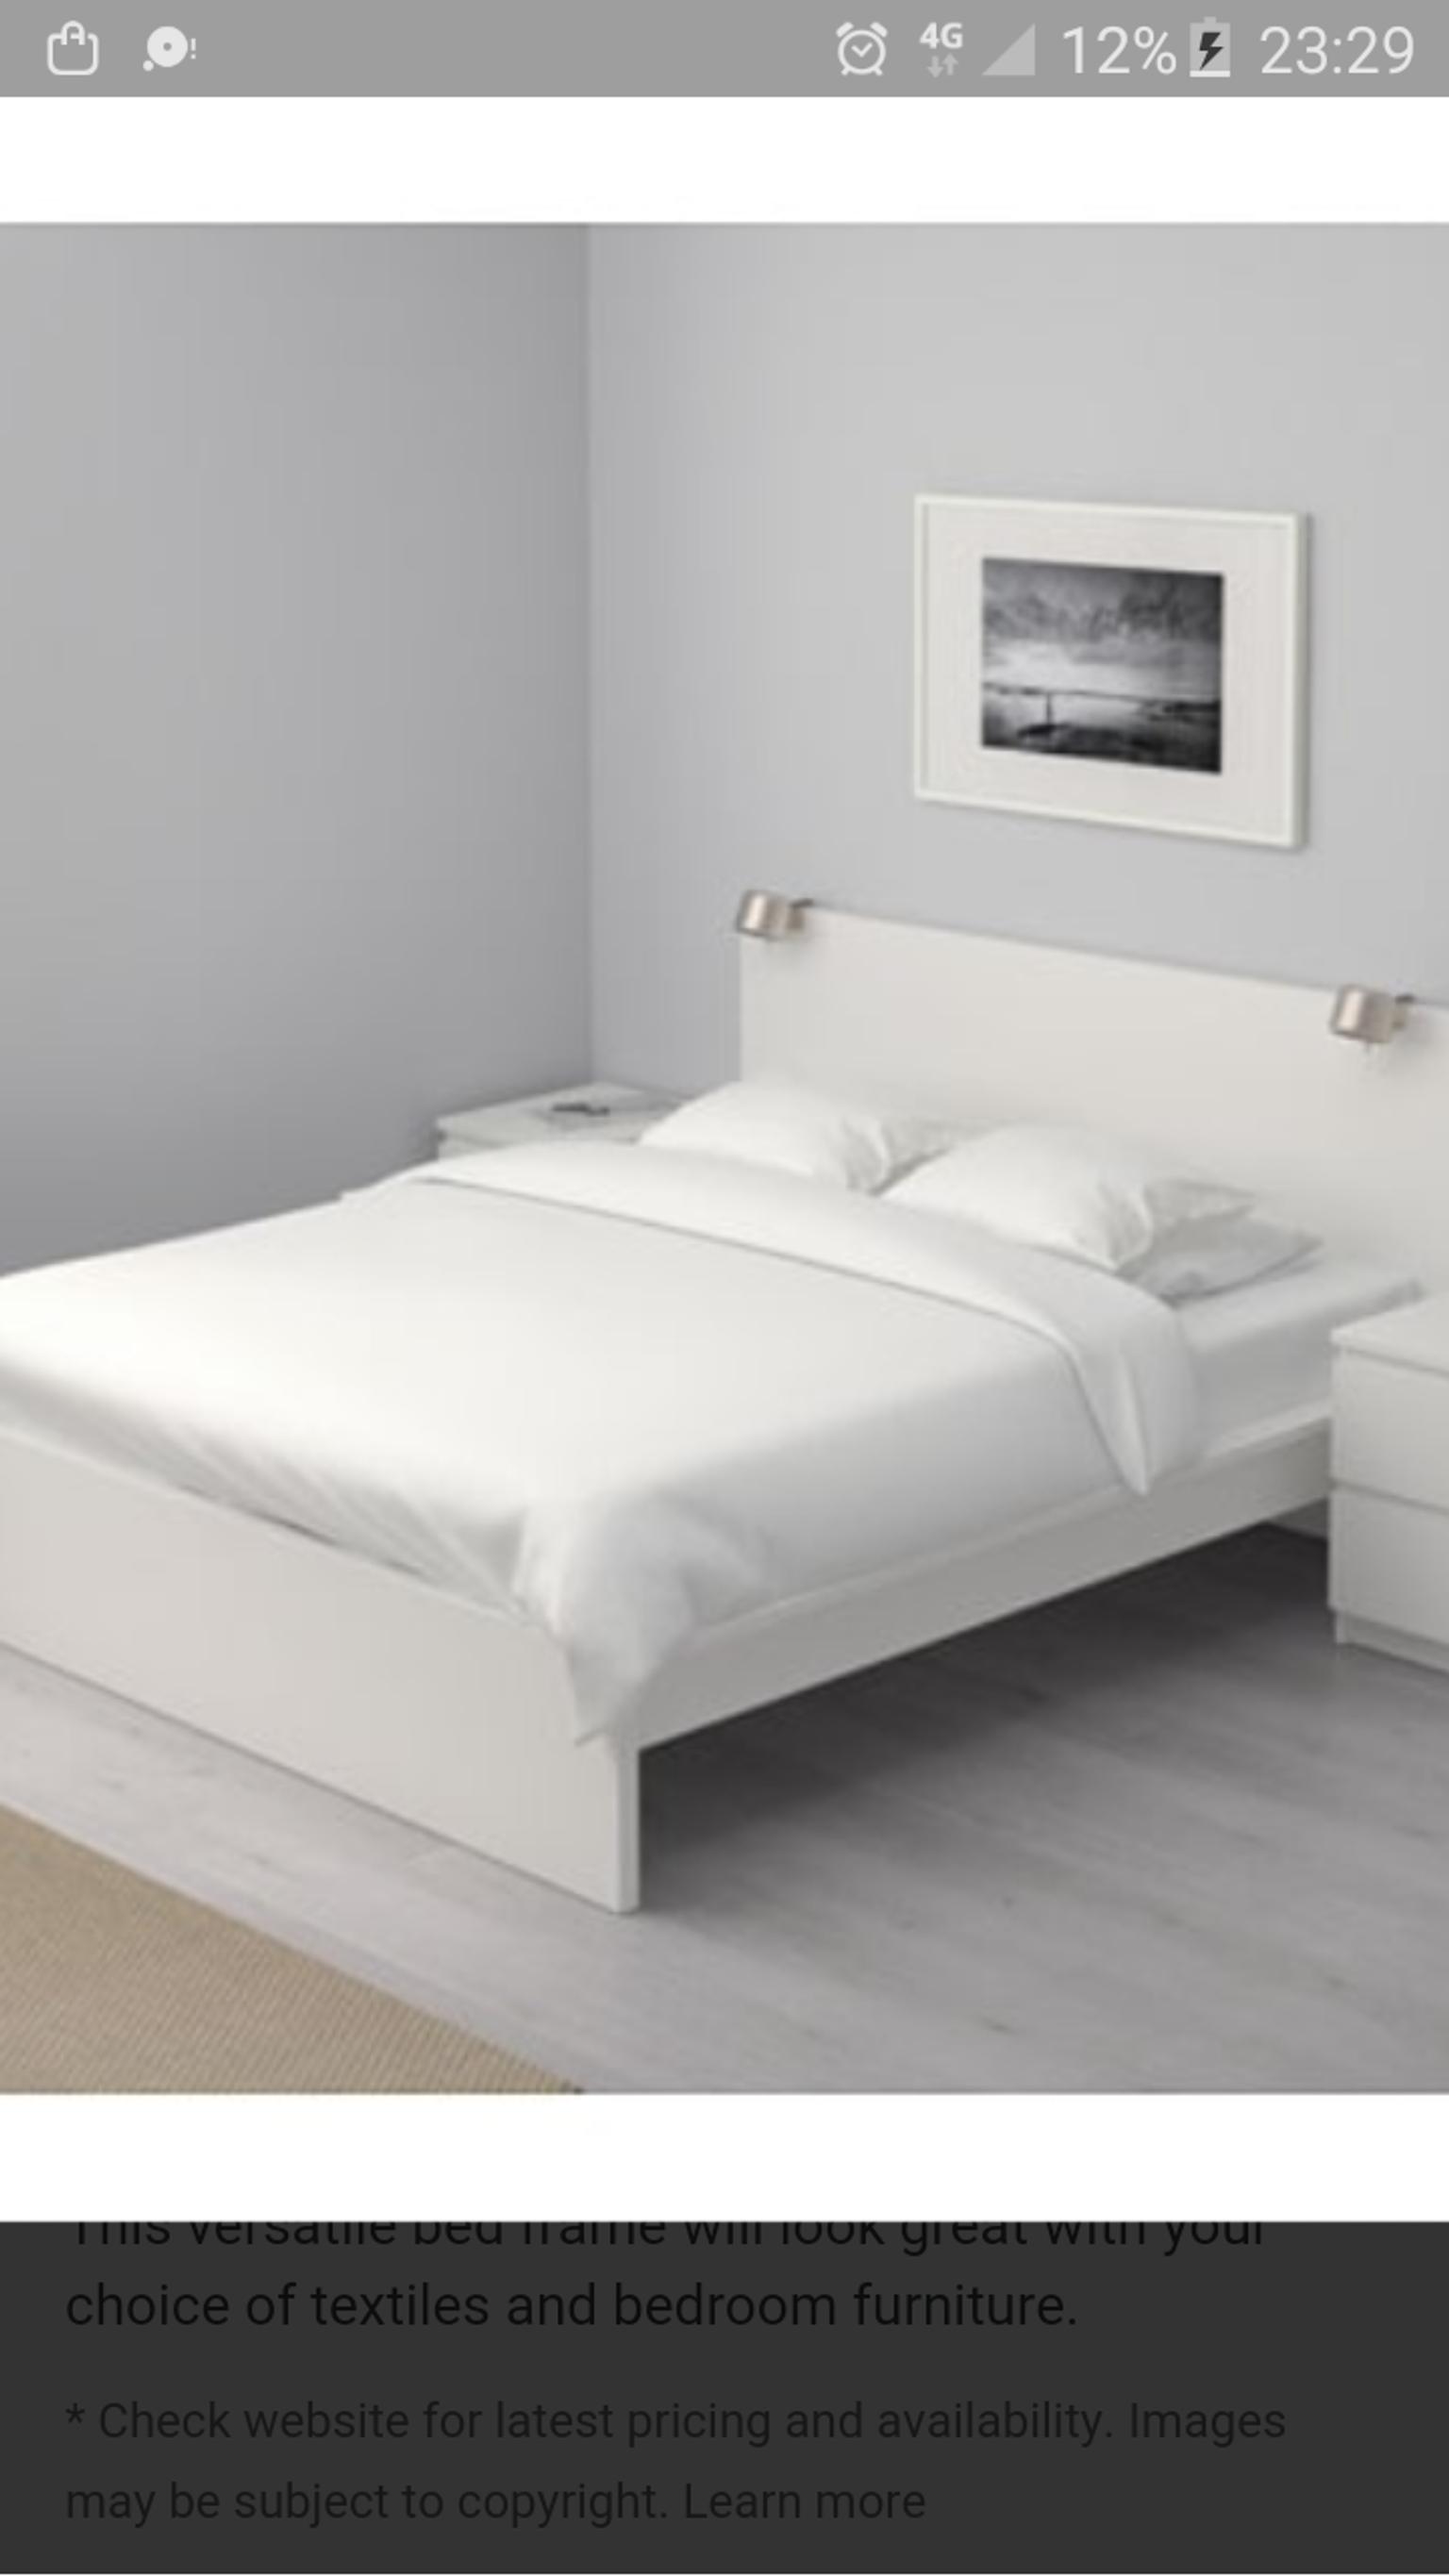 Ikea King Size Malm Bed In Sw1v, Malm King Size Bed Frame